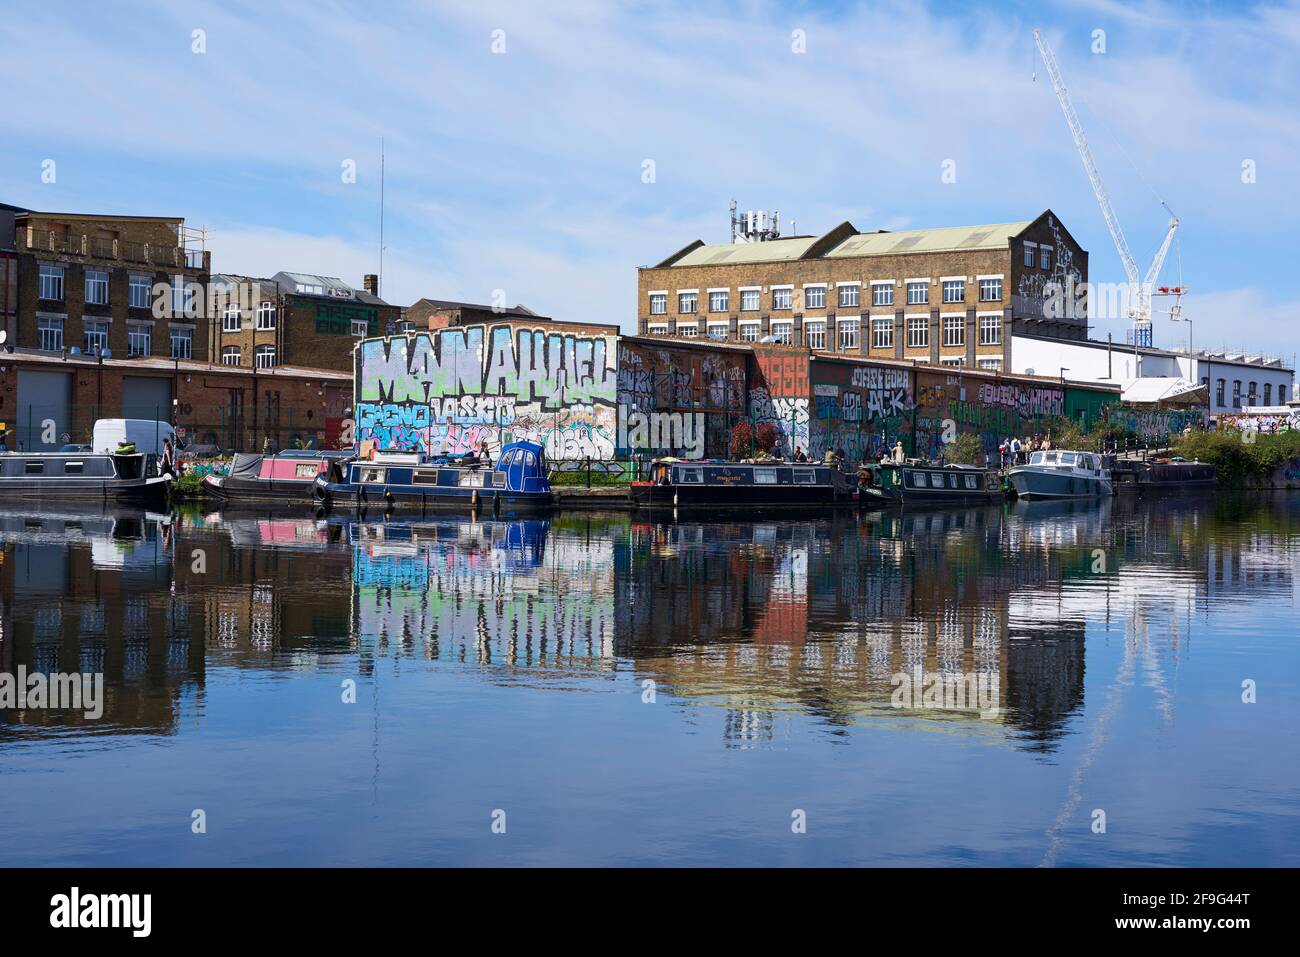 Narrwboats and Buildings lungo il fiume Lea Navigation a Hackney Wick, East London UK Foto Stock